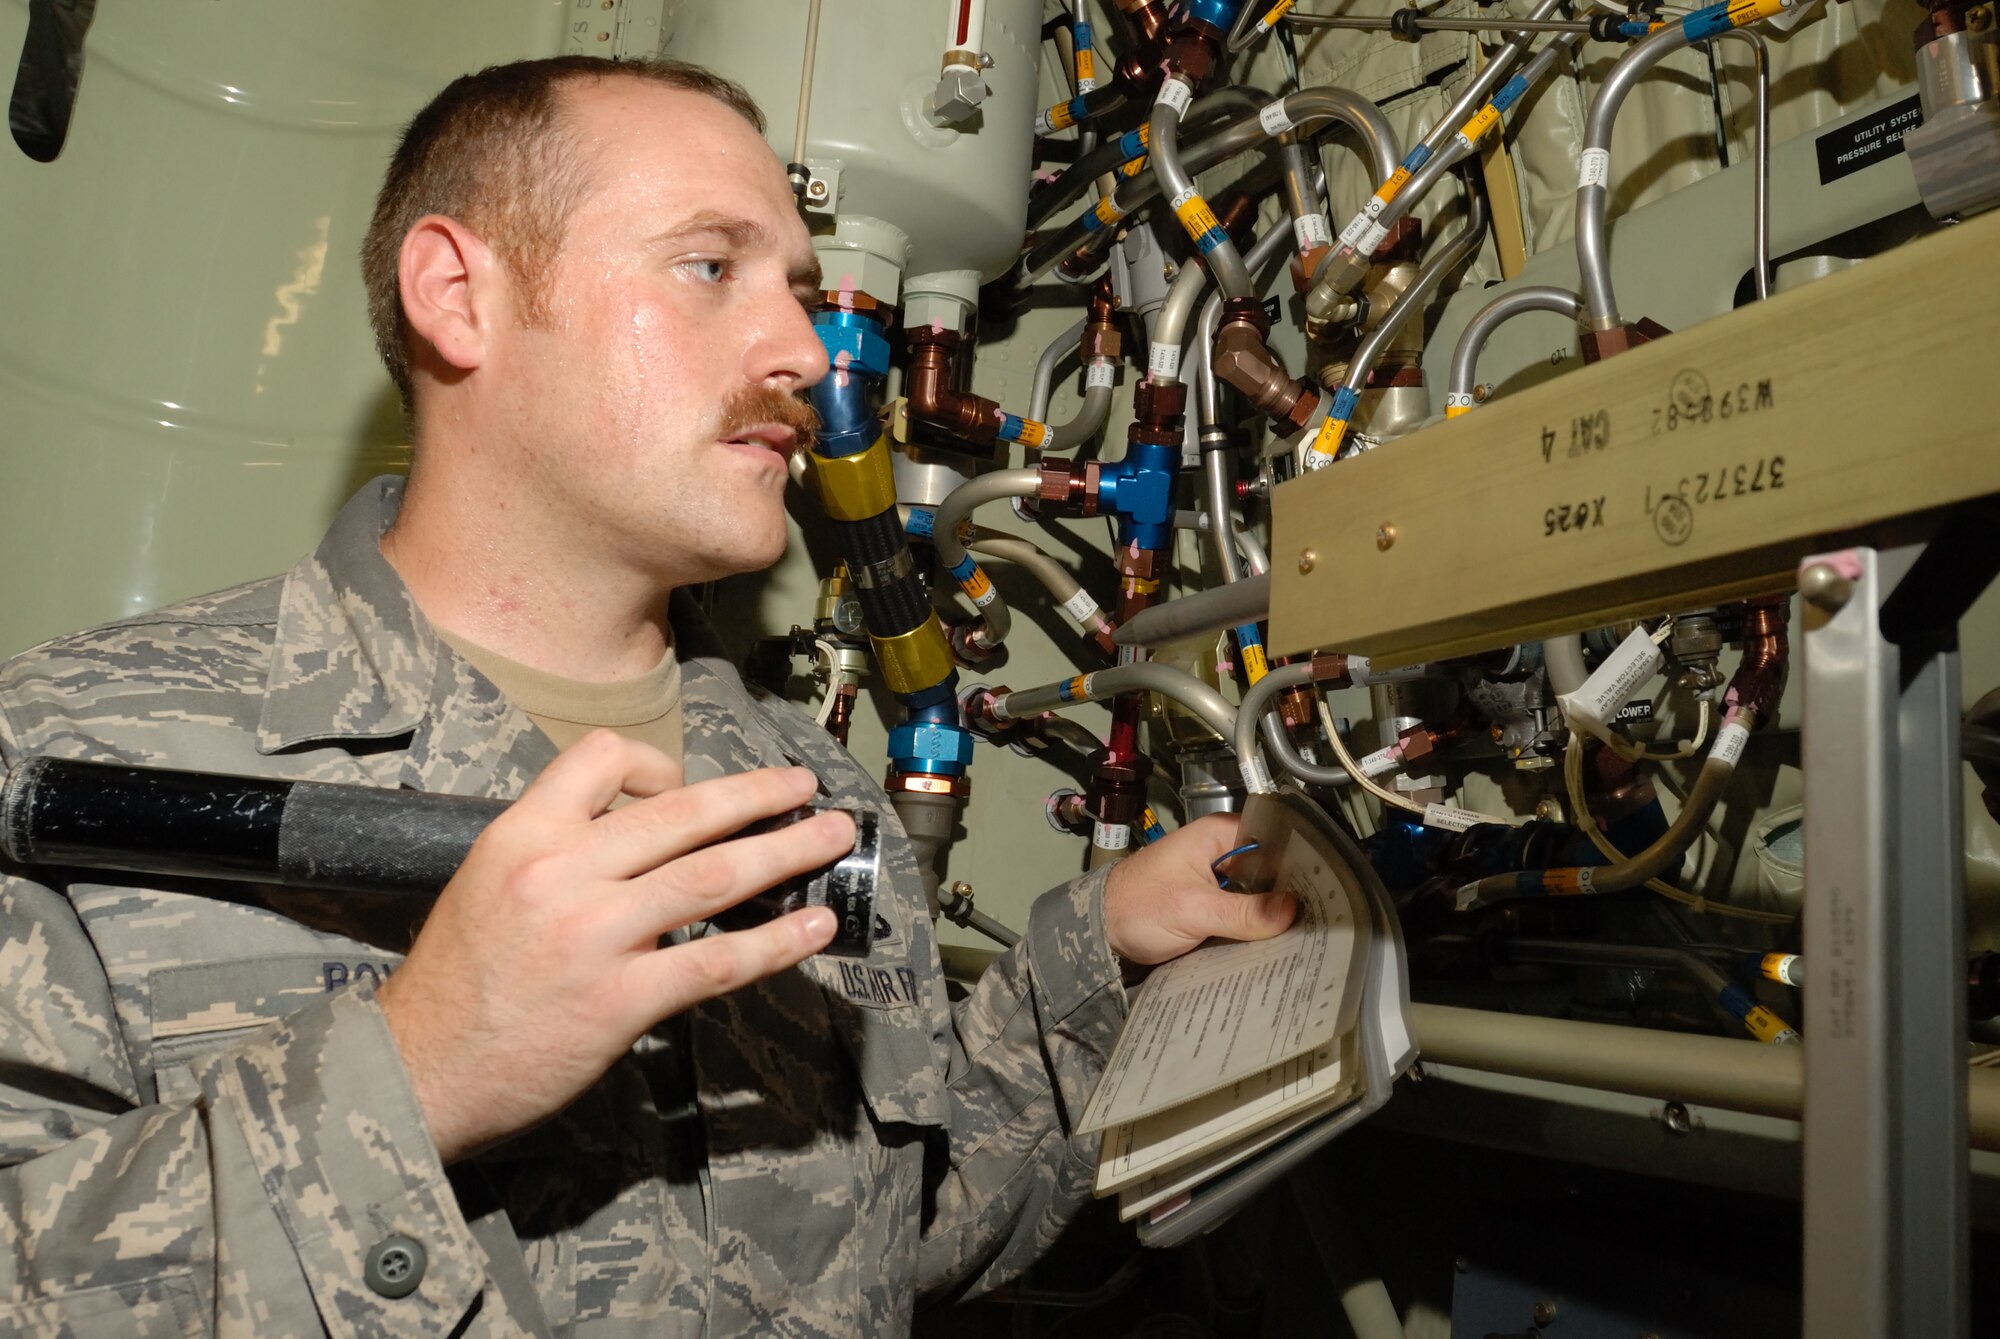 LITTLE ROCK AIR FORCE BASE, Ark.--Tech. Sgt. Jeremy Boyd, 314th Maintenance Group, inspects  the hydraulics on C-130 on the flightline July 29.  Sergeant Boyd is the hydraulics inspector specialist for his team of Quality Assurance. (U.S. Air Force photo by Senior Airman Christine Clark)(Released)